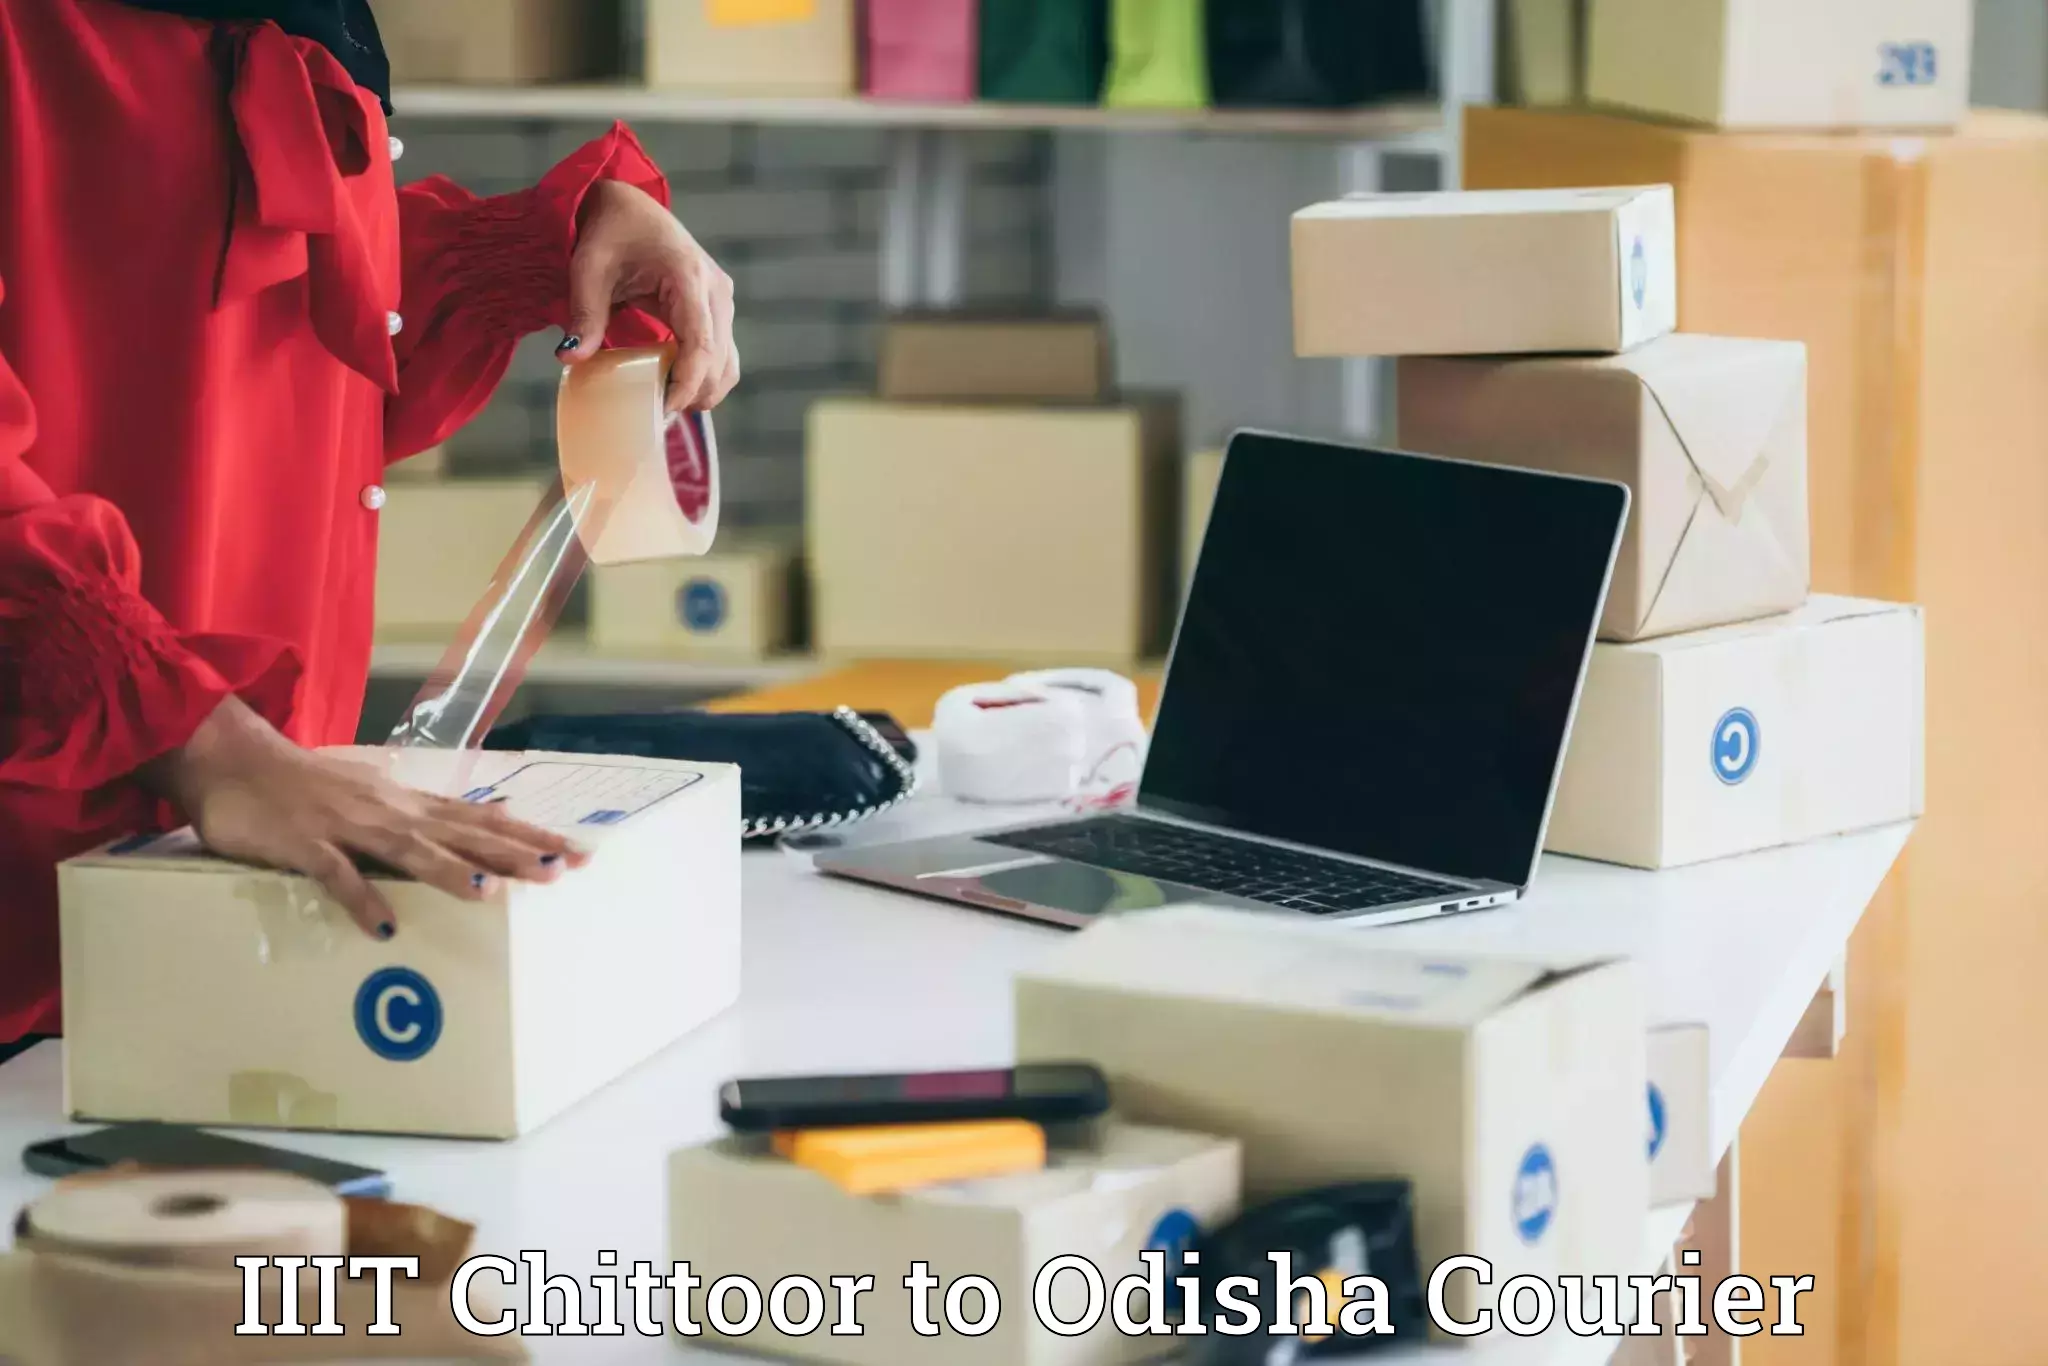 State-of-the-art courier technology IIIT Chittoor to Mayurbhanj